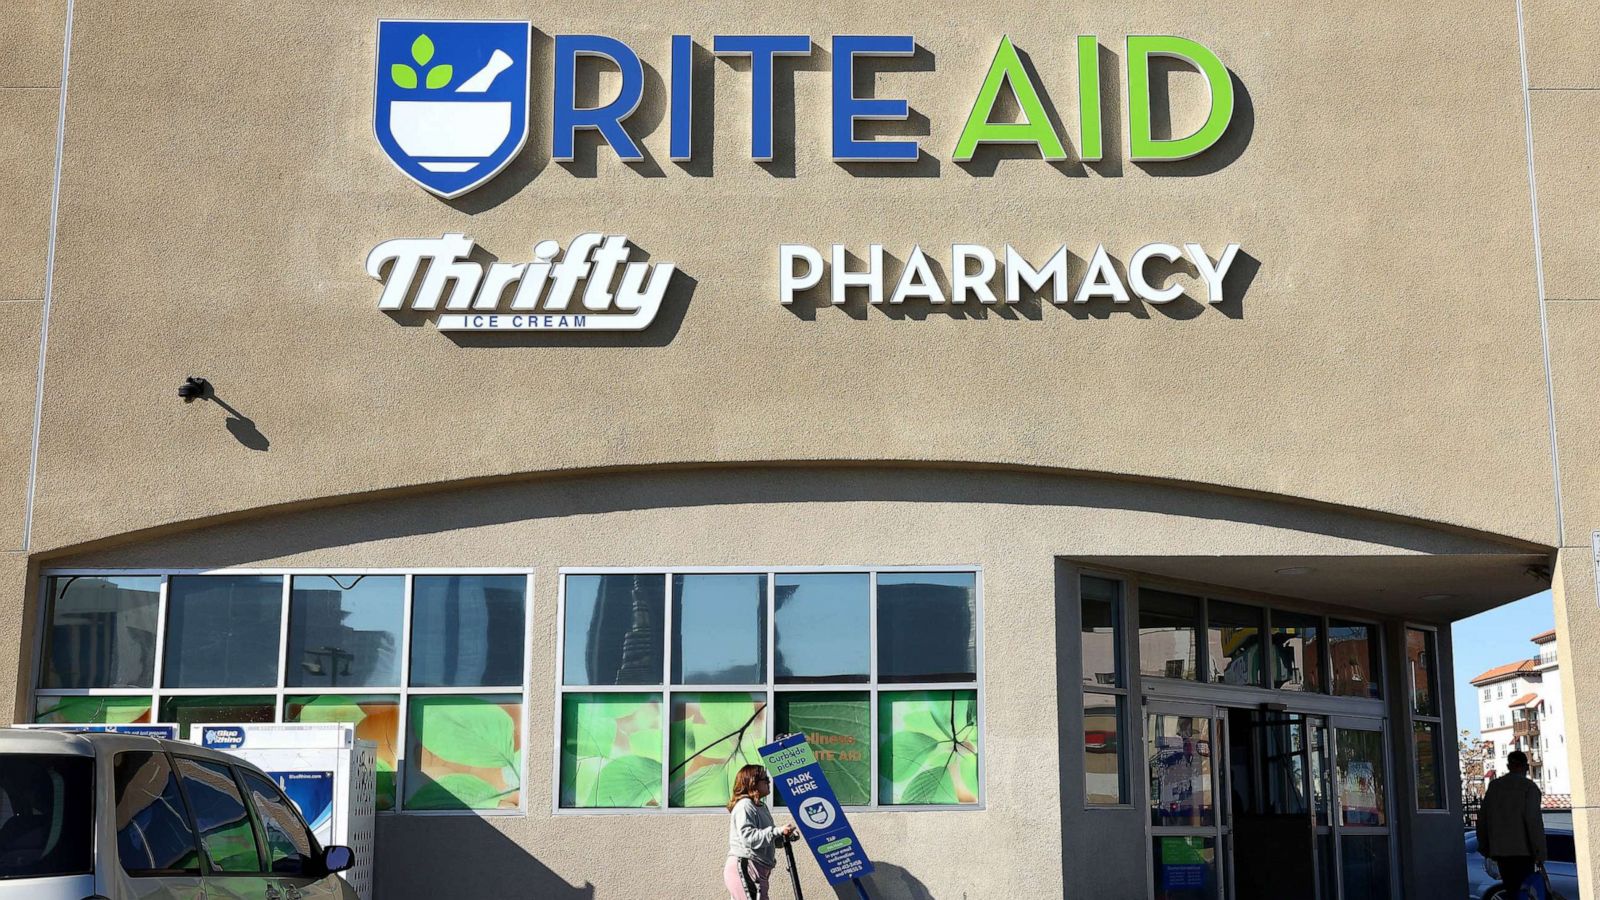 Rite Aid files for bankruptcy, announces financial restructuring plans amid  opioid complaints, lawsuits - ABC News